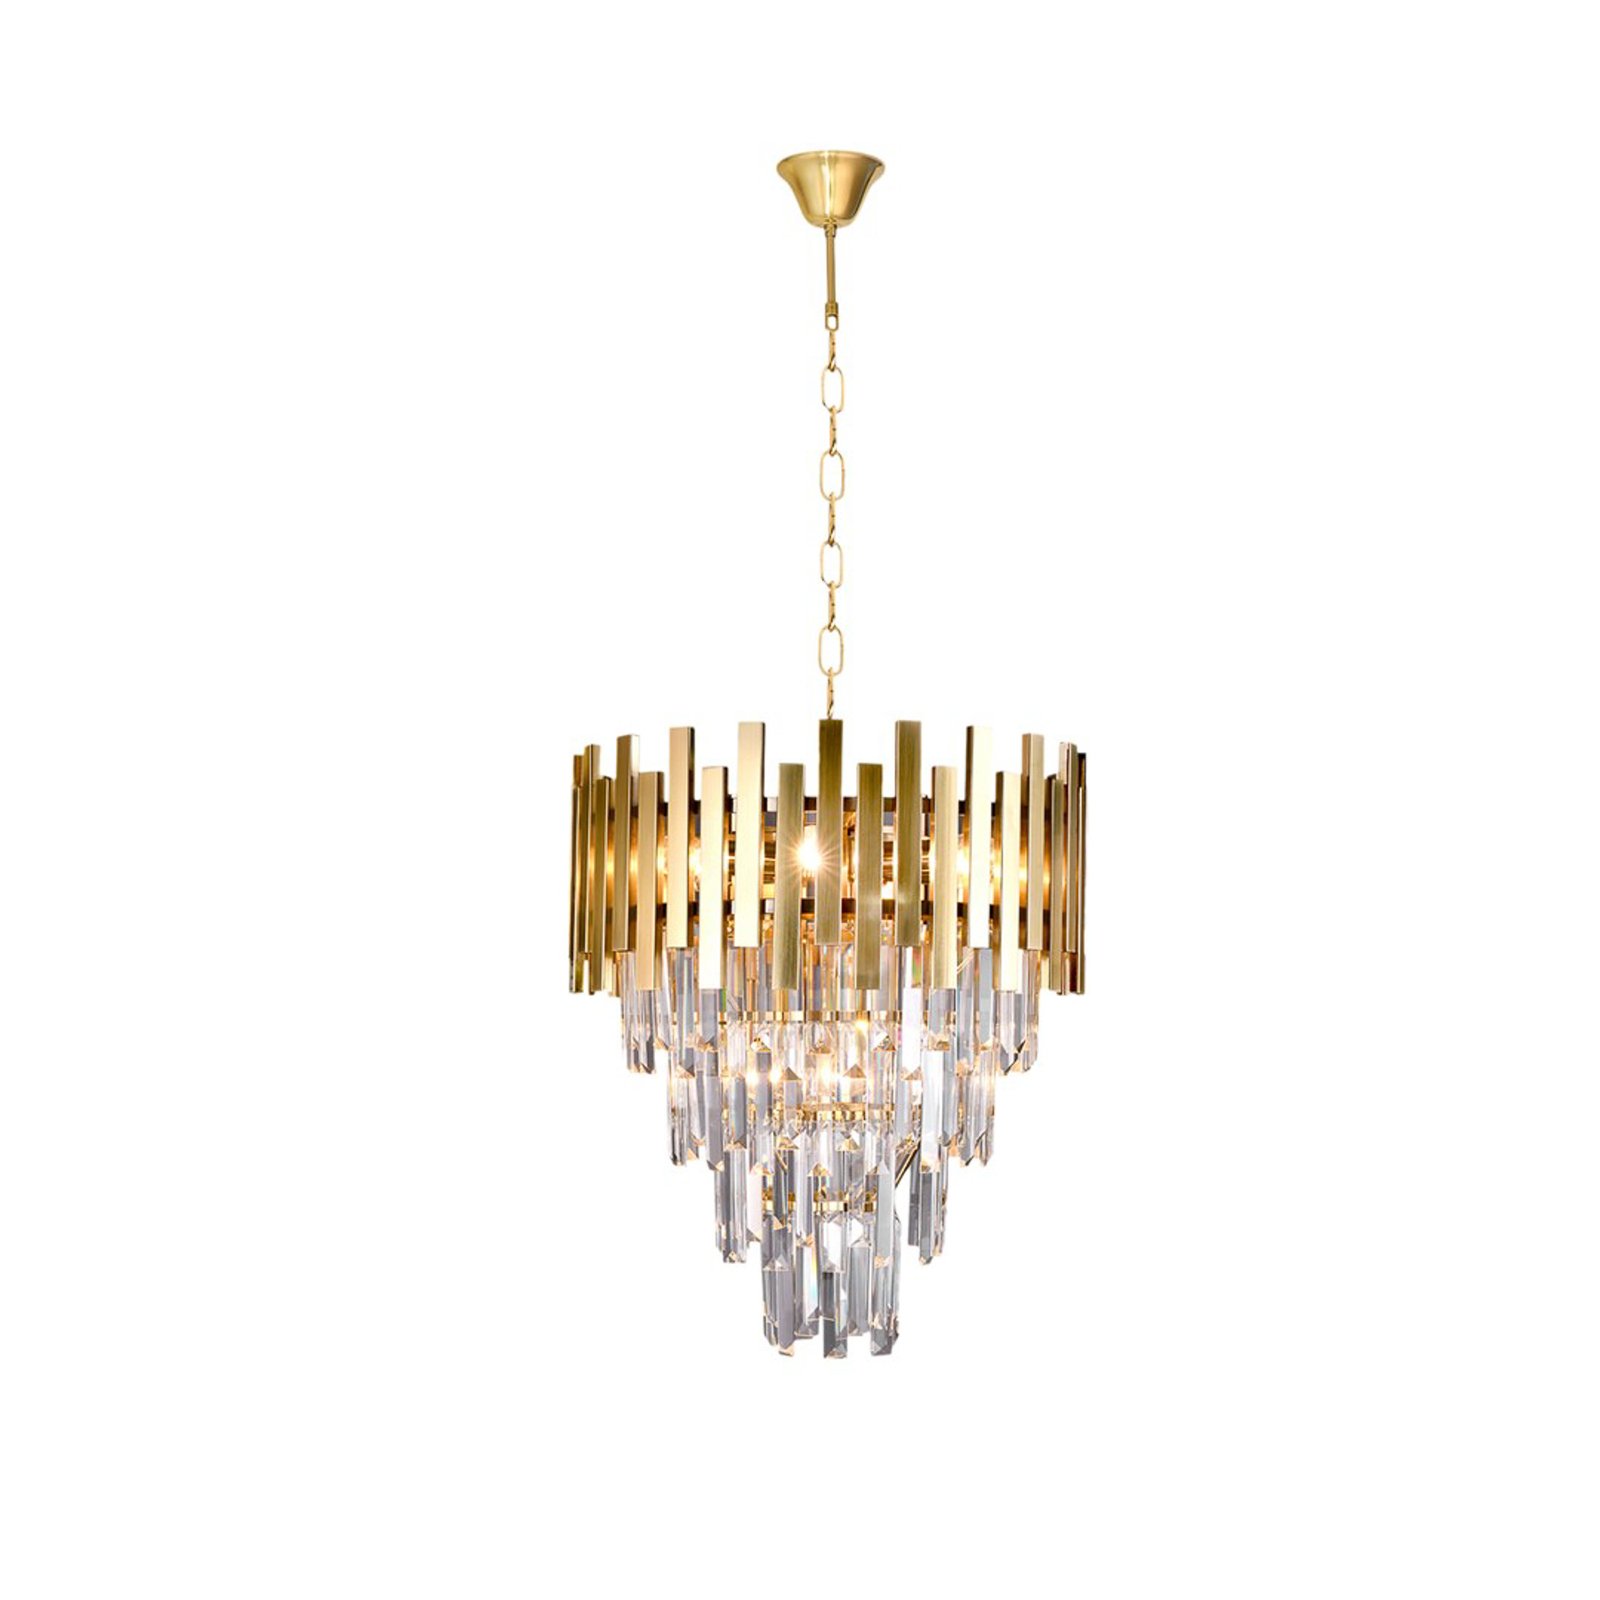 Hanging light Aspen metal gold-coloured glass crystals, height 50 cm